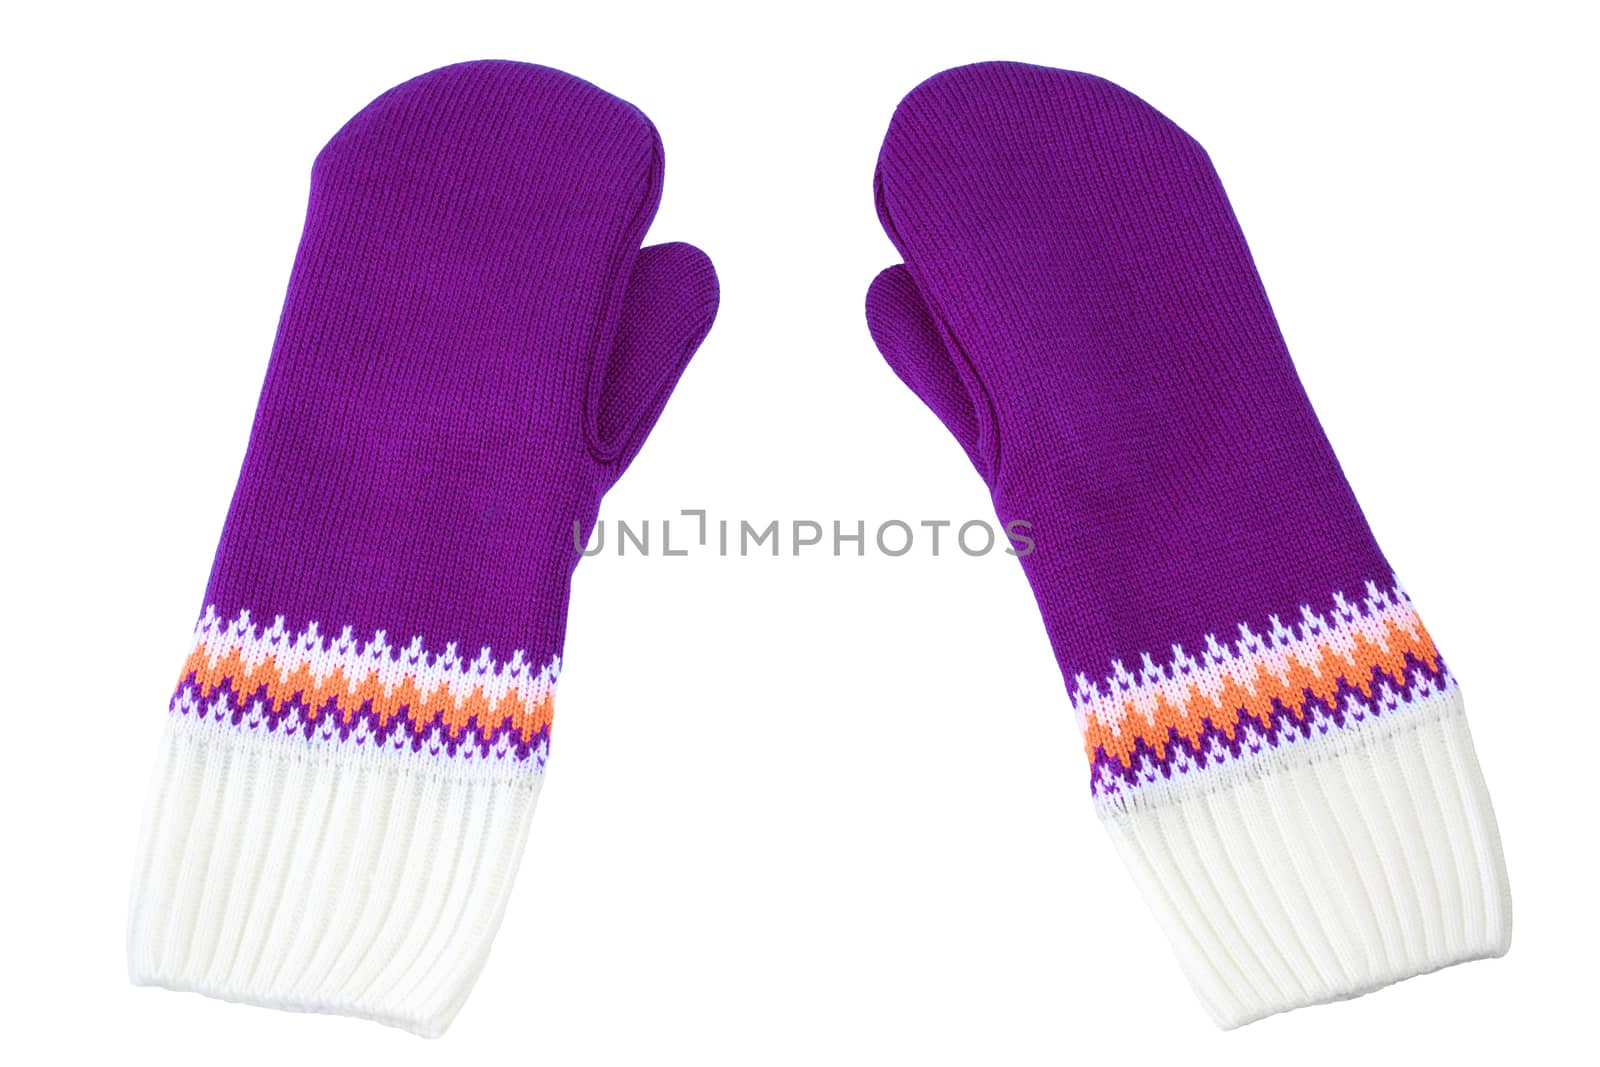 purple and white knited mittens isolated on white background by z1b